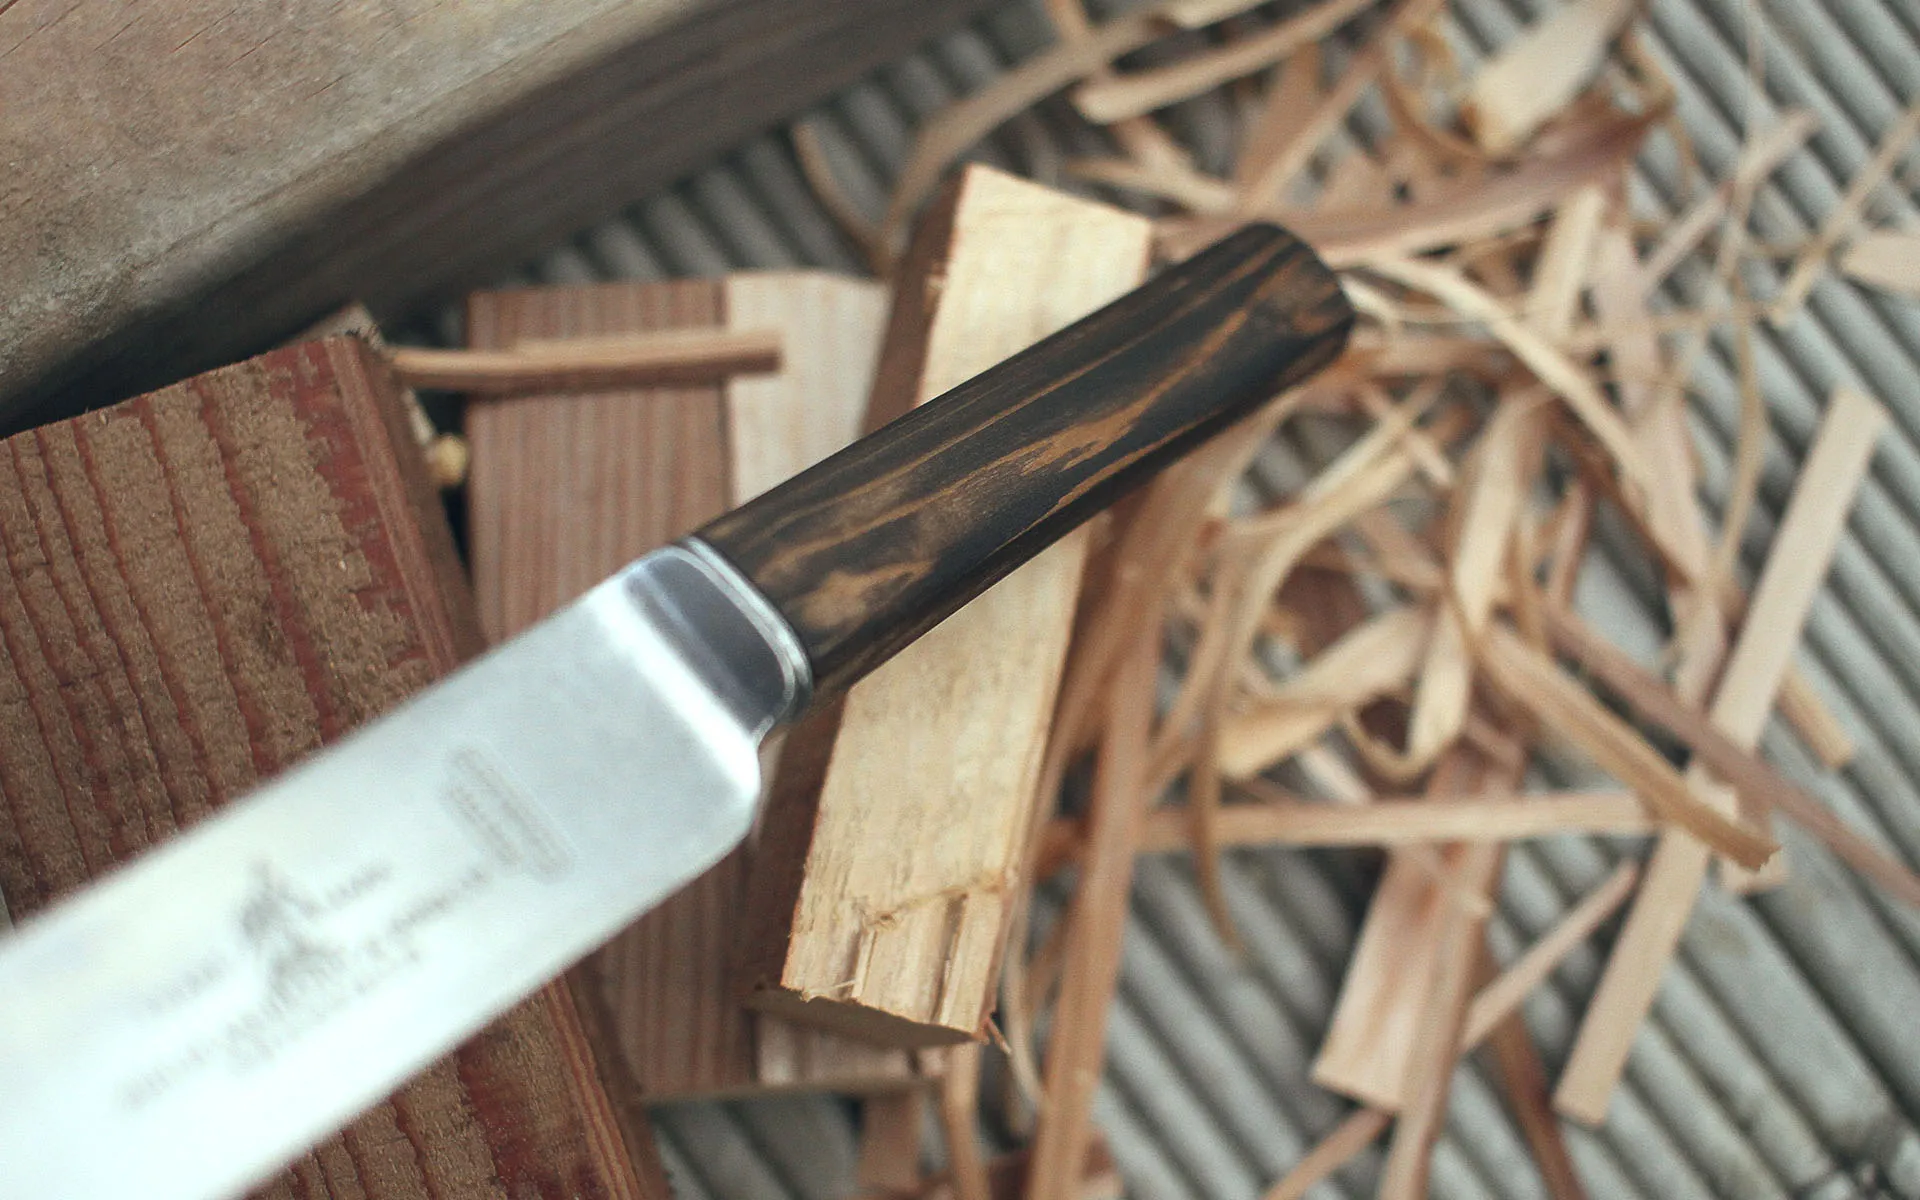 Closeup of a stain finish of the new knife handle.